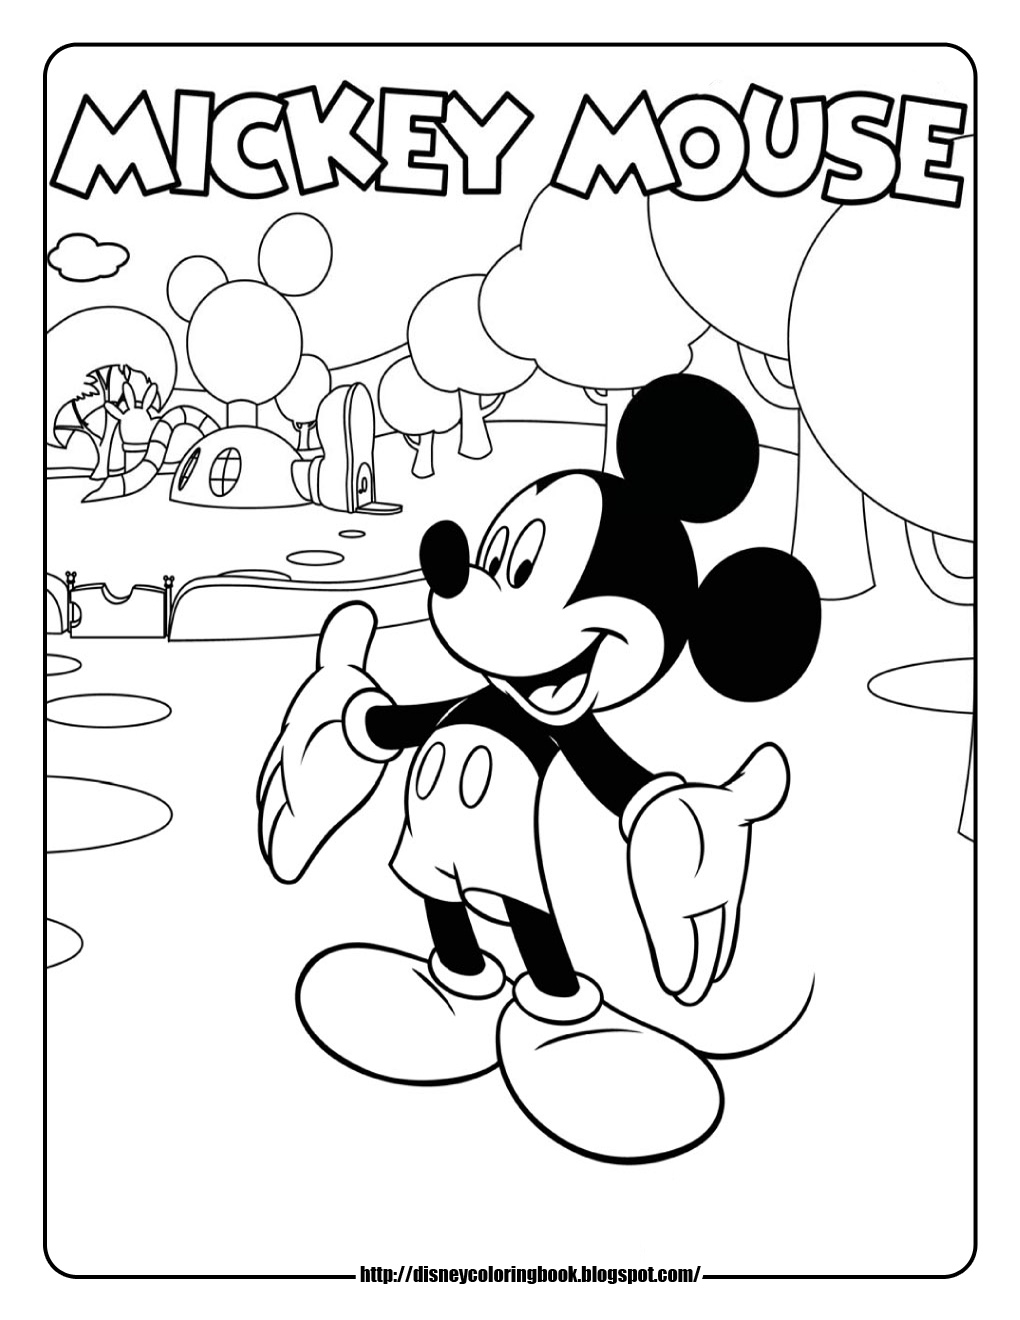 Mickey Mouse Clubhouse 1: Free Disney Coloring Sheets | Learn To Coloring